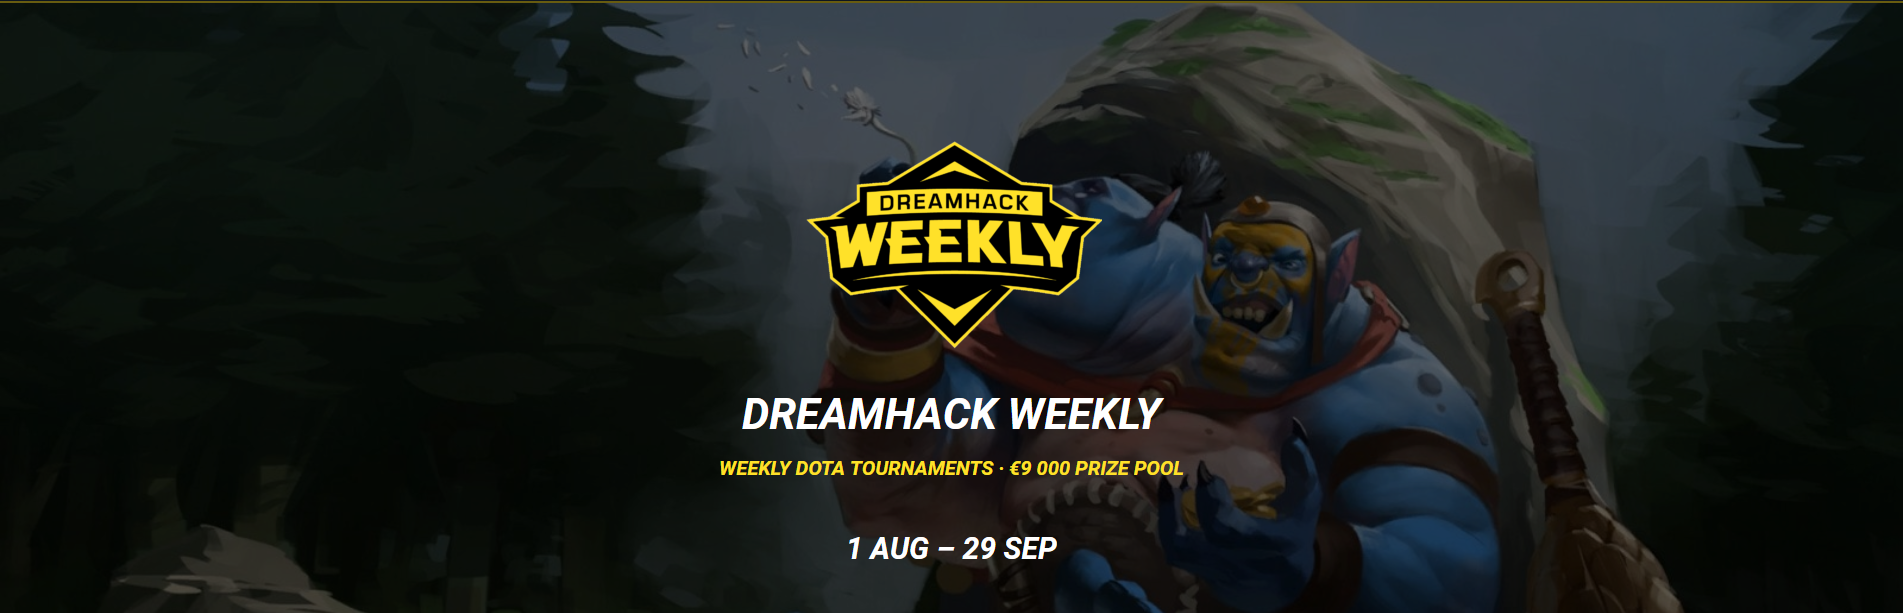 €9,000 tournament series in Dota 2 from DreamHack on Challengermode by Ludwig Lidell Challengermode